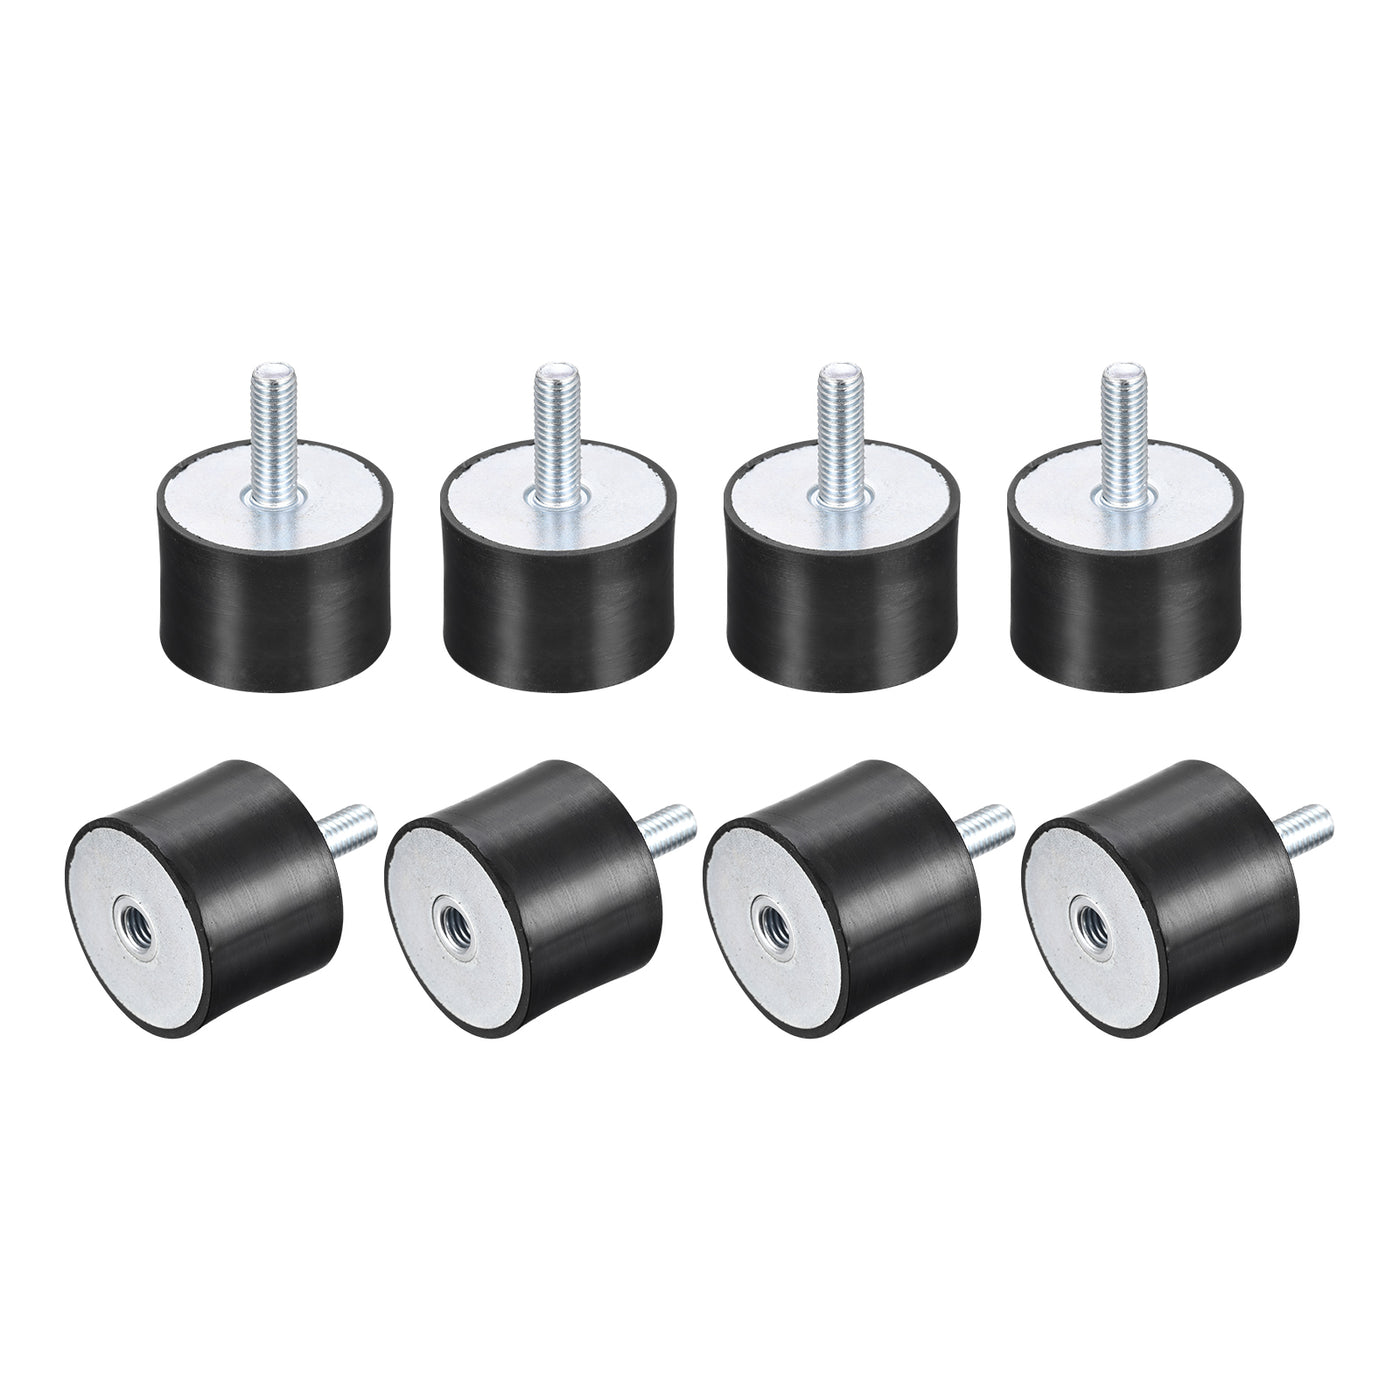 uxcell Uxcell Rubber Mount 8pcs M8 Male/Female Vibration Isolator Shock Absorber, D40mmxH30mm